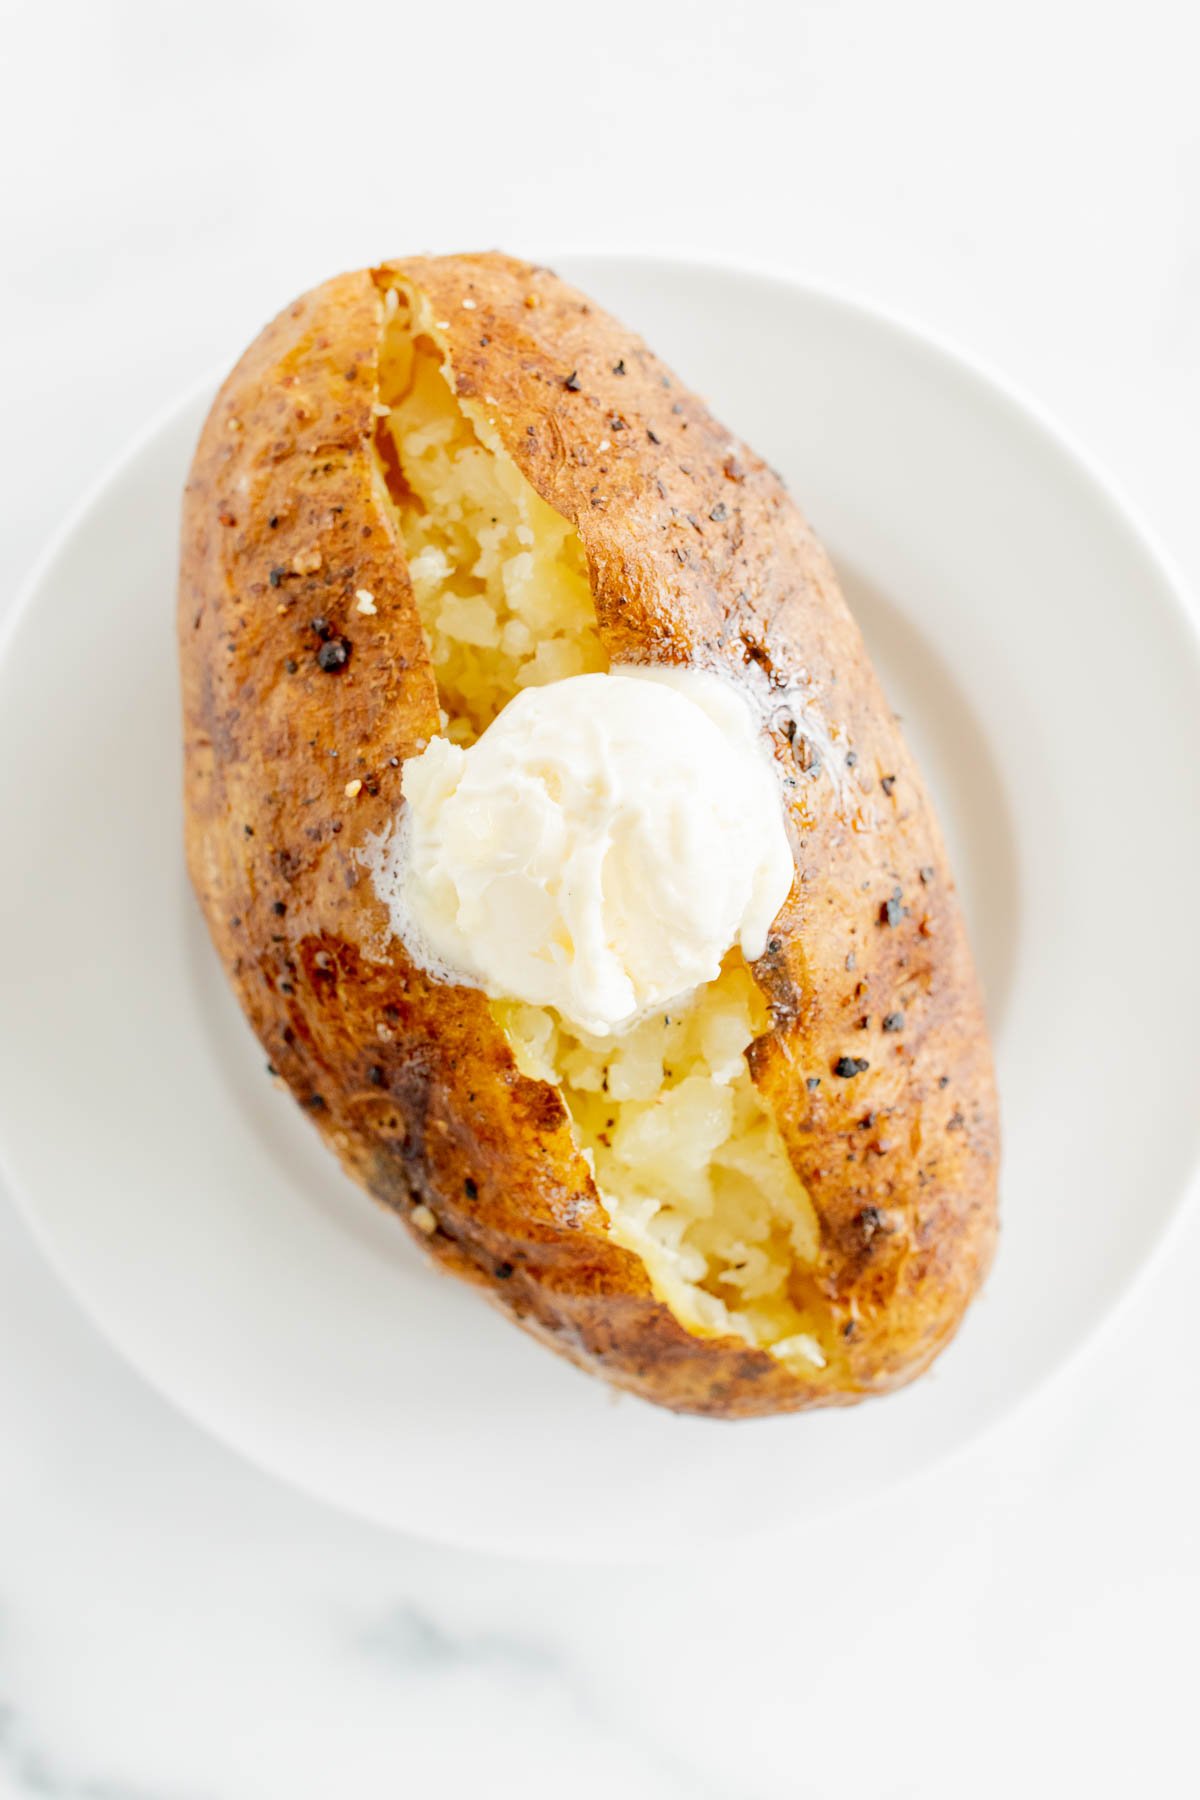 A grilled baked potato on a white plate with a topping of butter and sour cream.